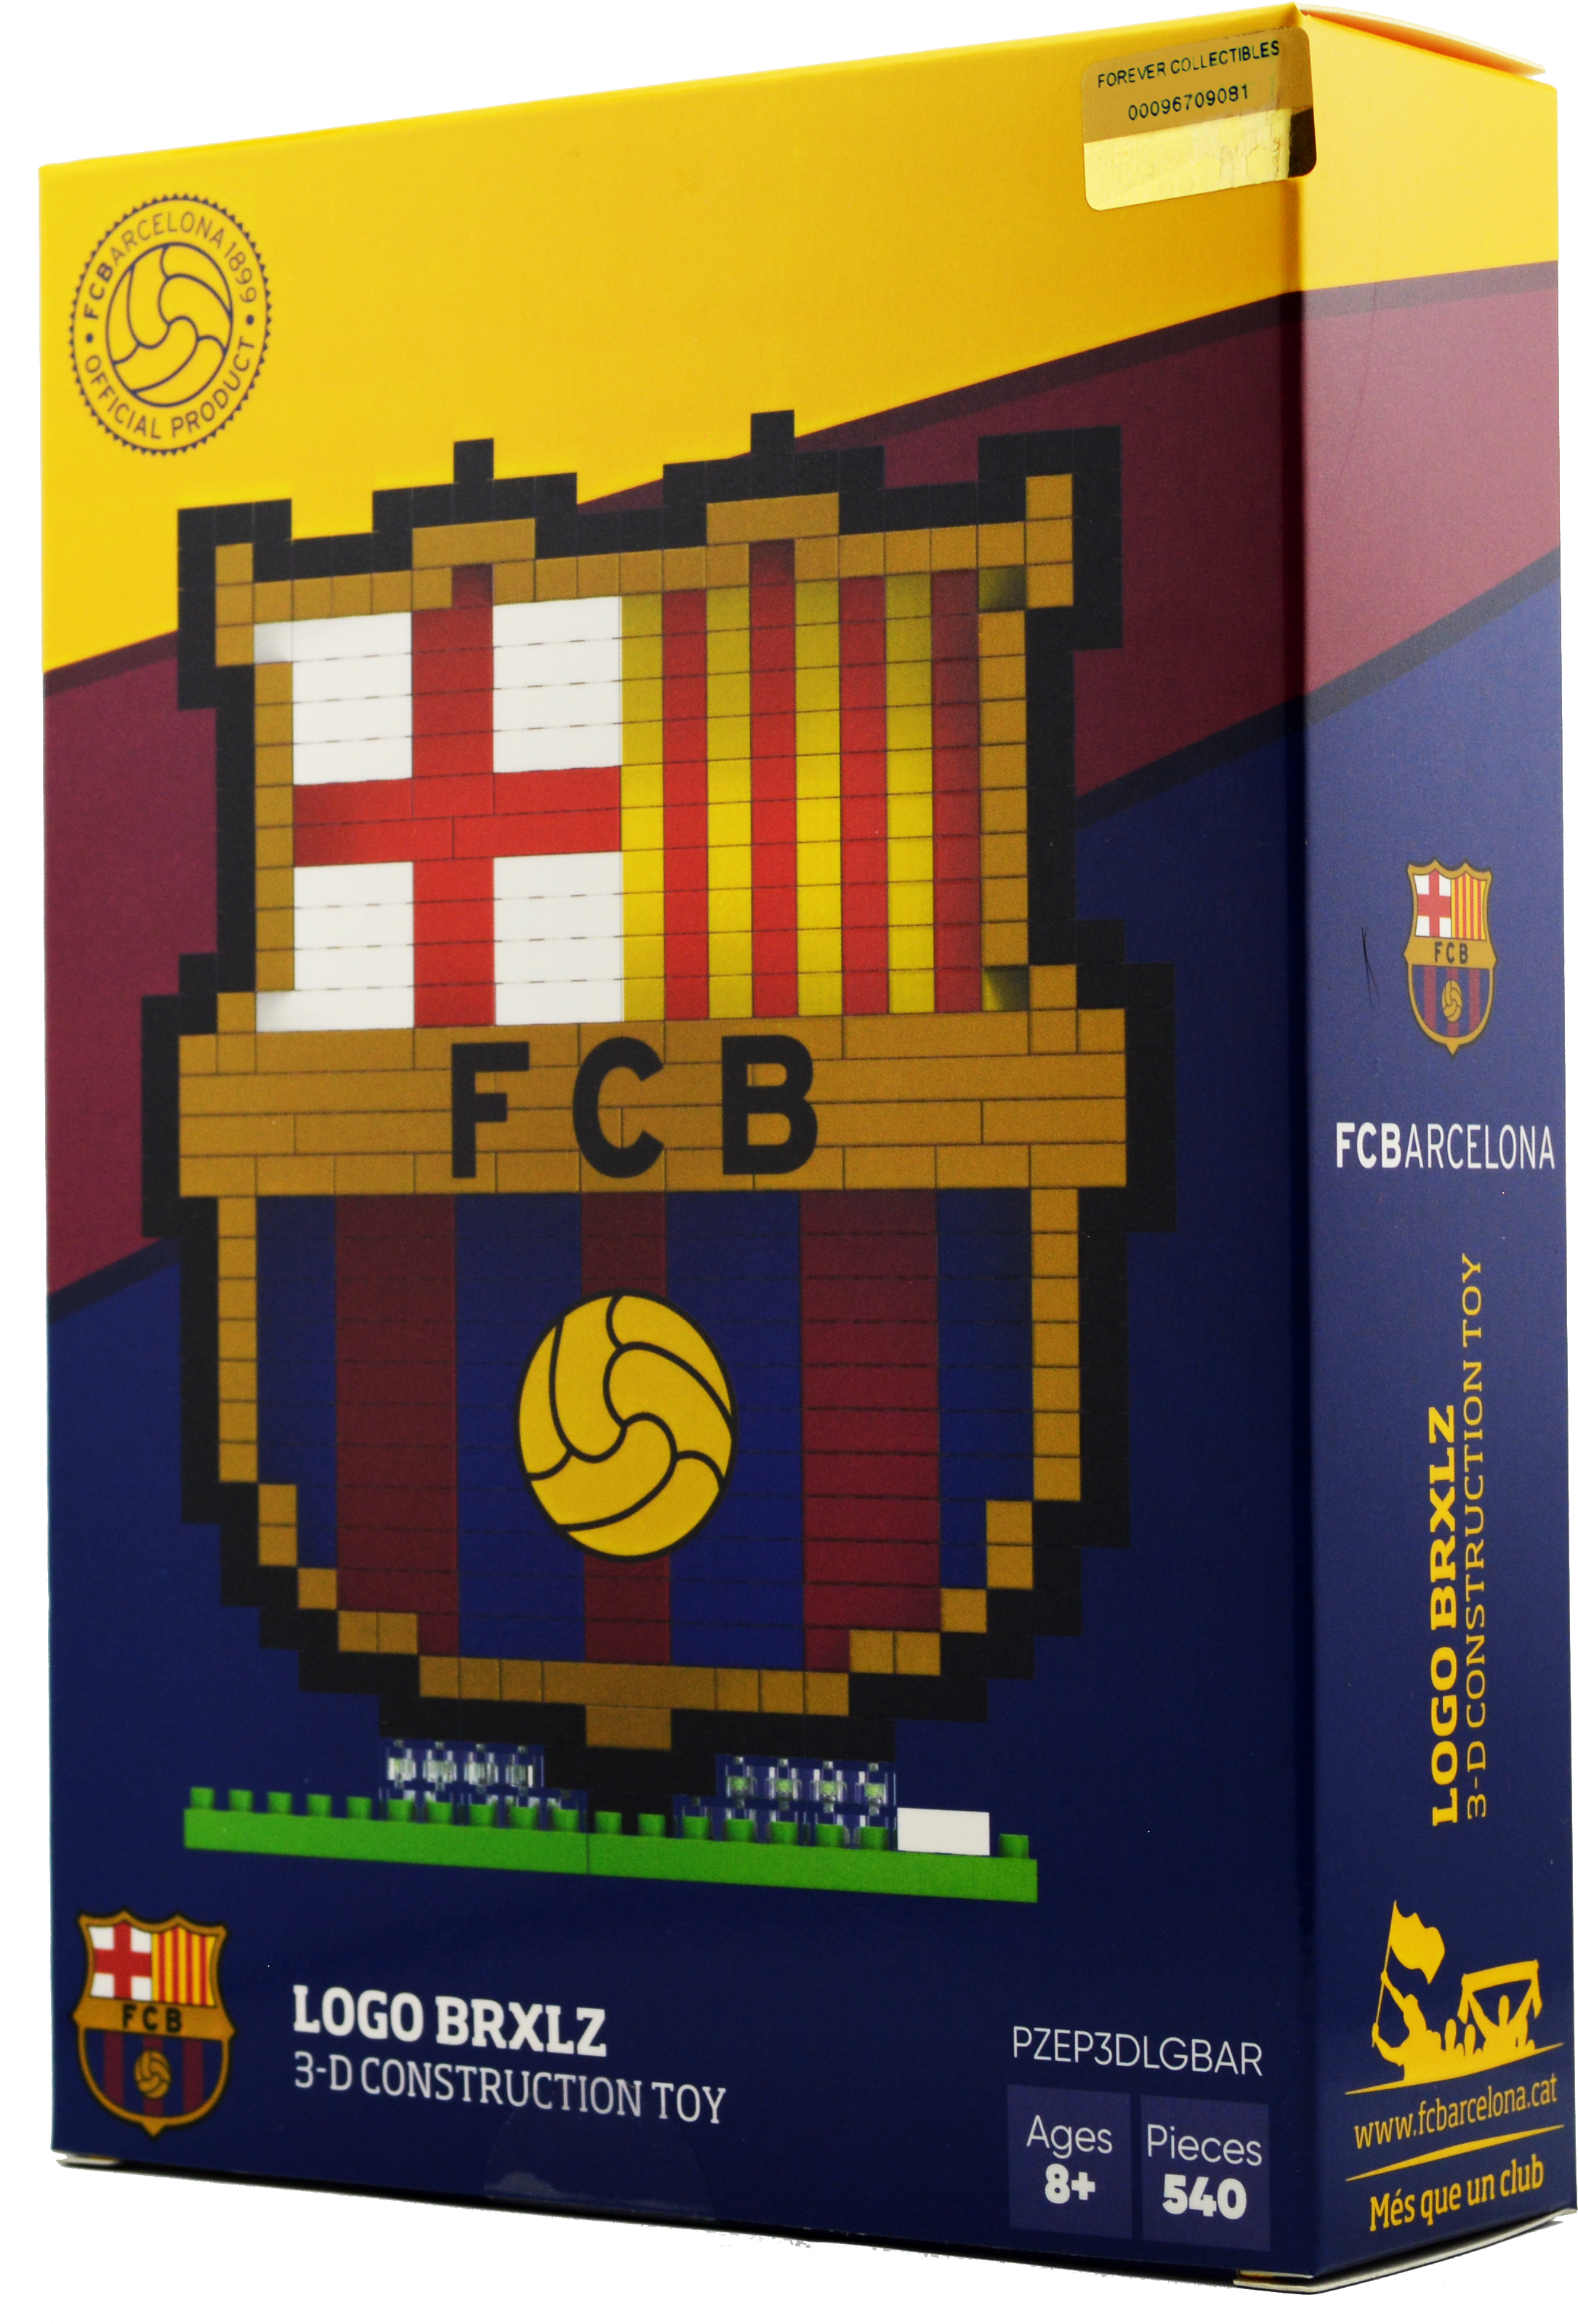 F C Barcelona3 D Construction Toy Box PNG image